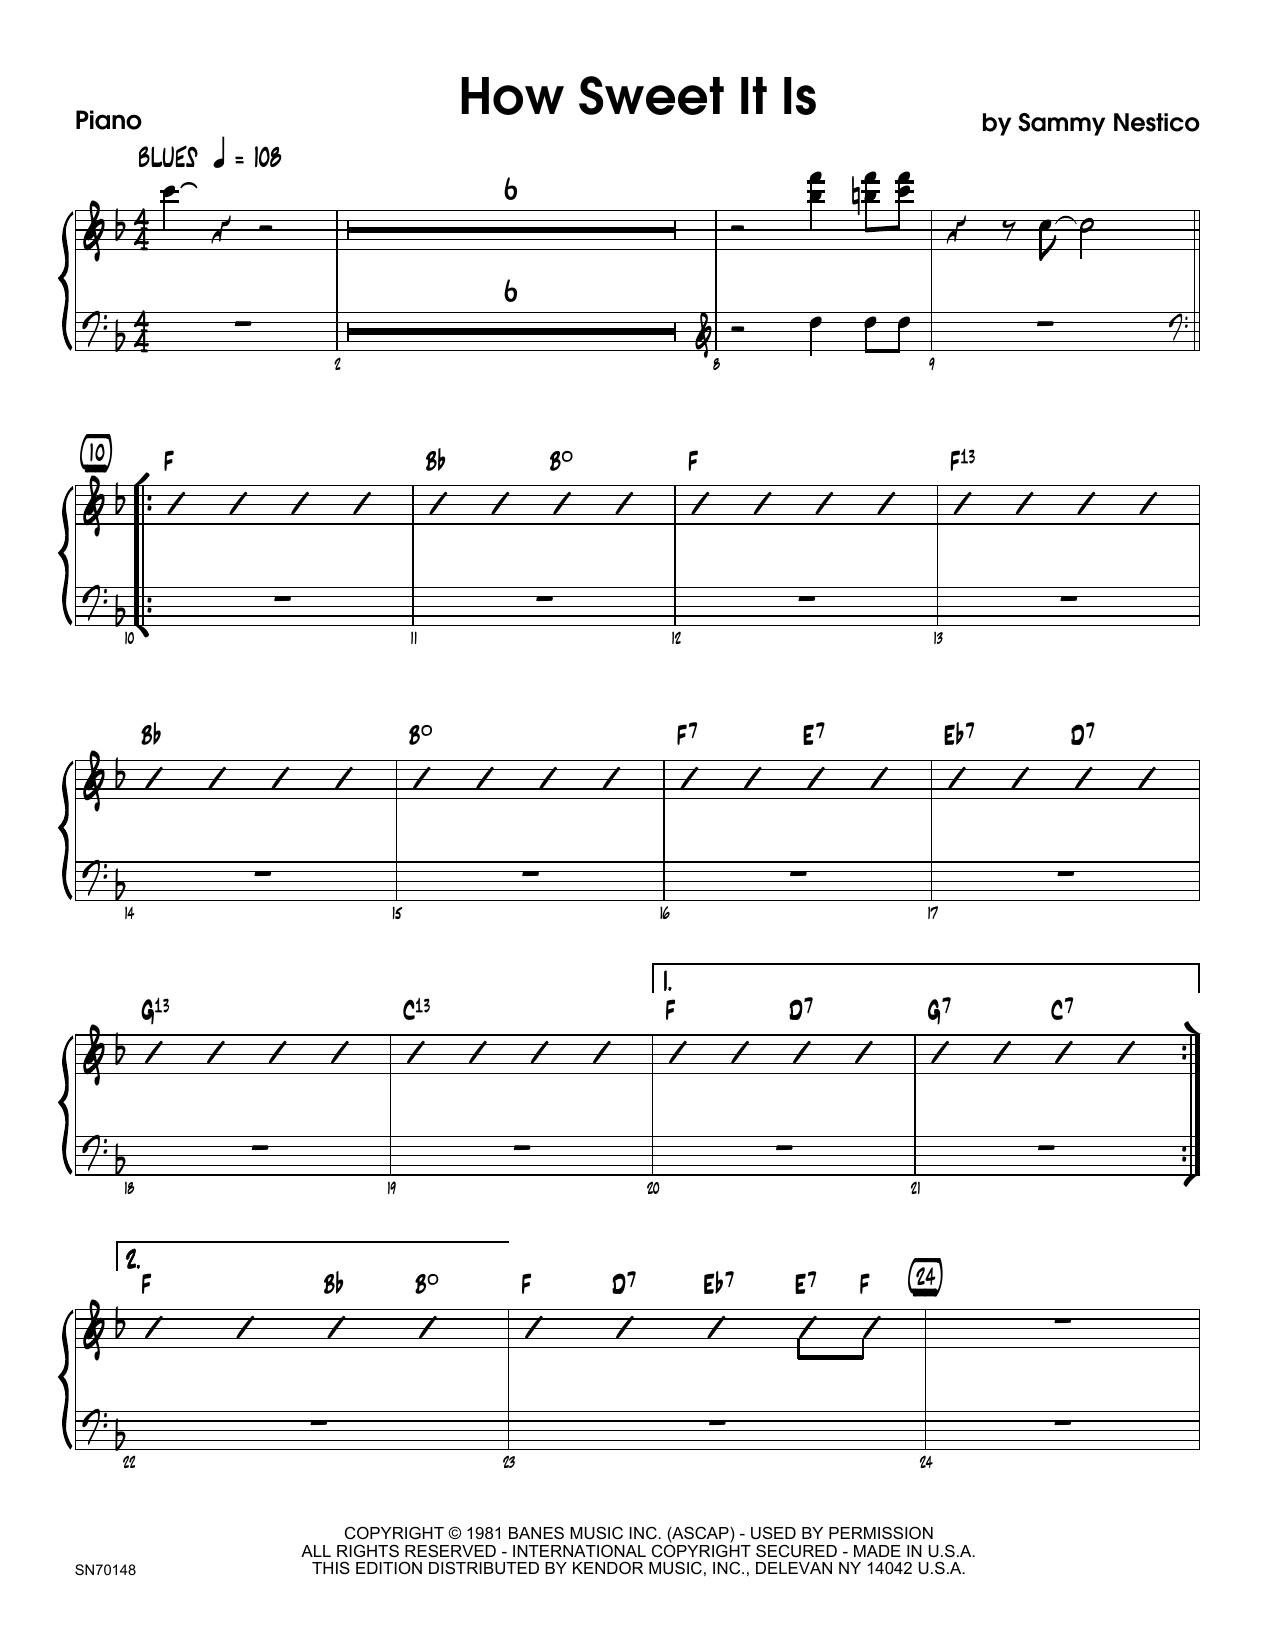 Download Sammy Nestico How Sweet It Is - Piano Sheet Music